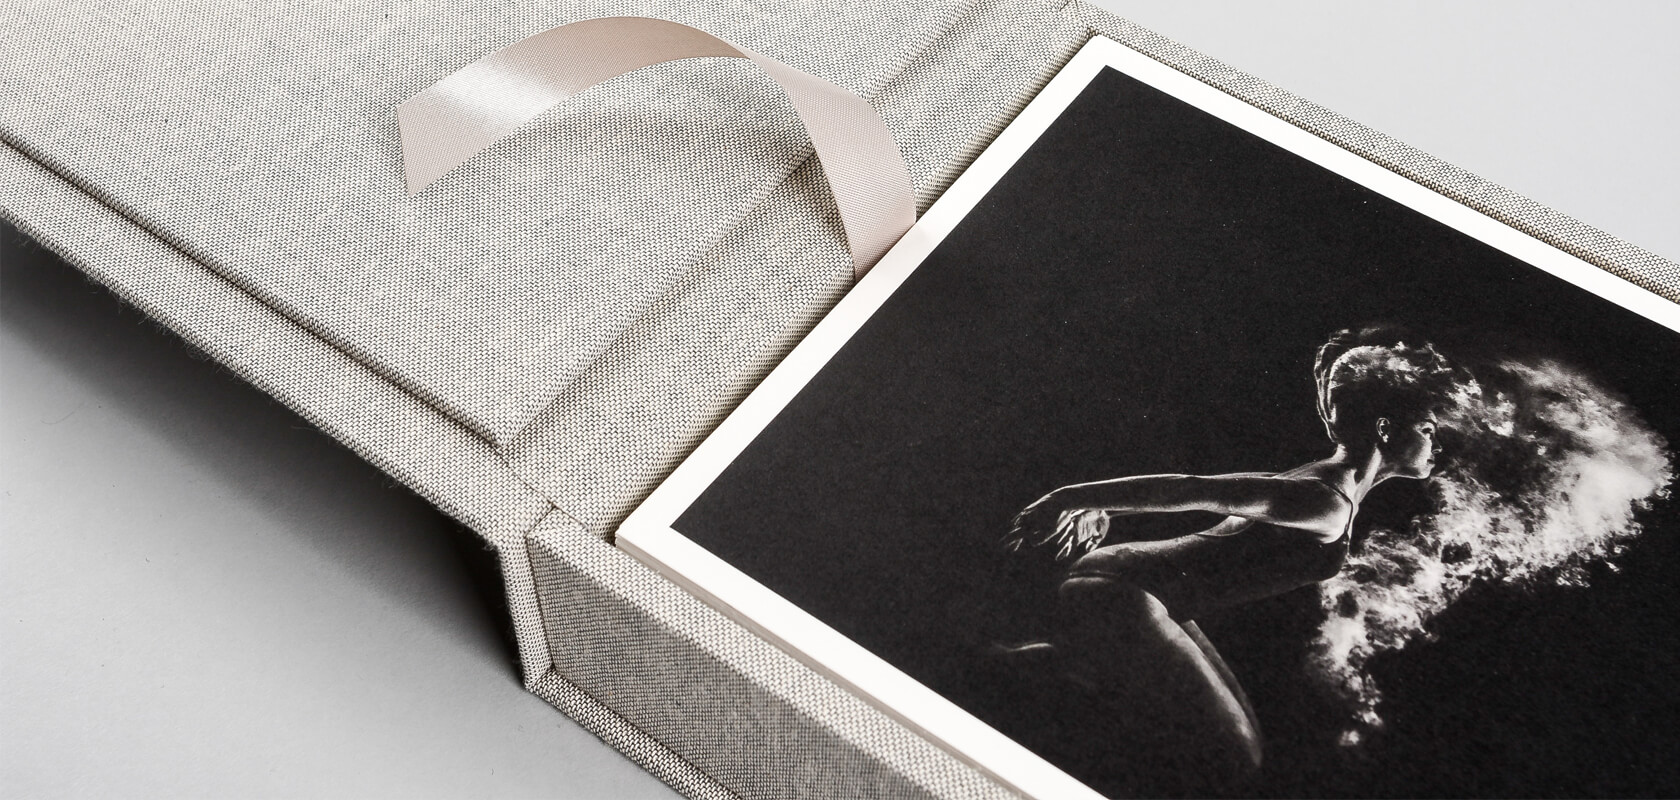 Complement order with a personalized matching box for prints.